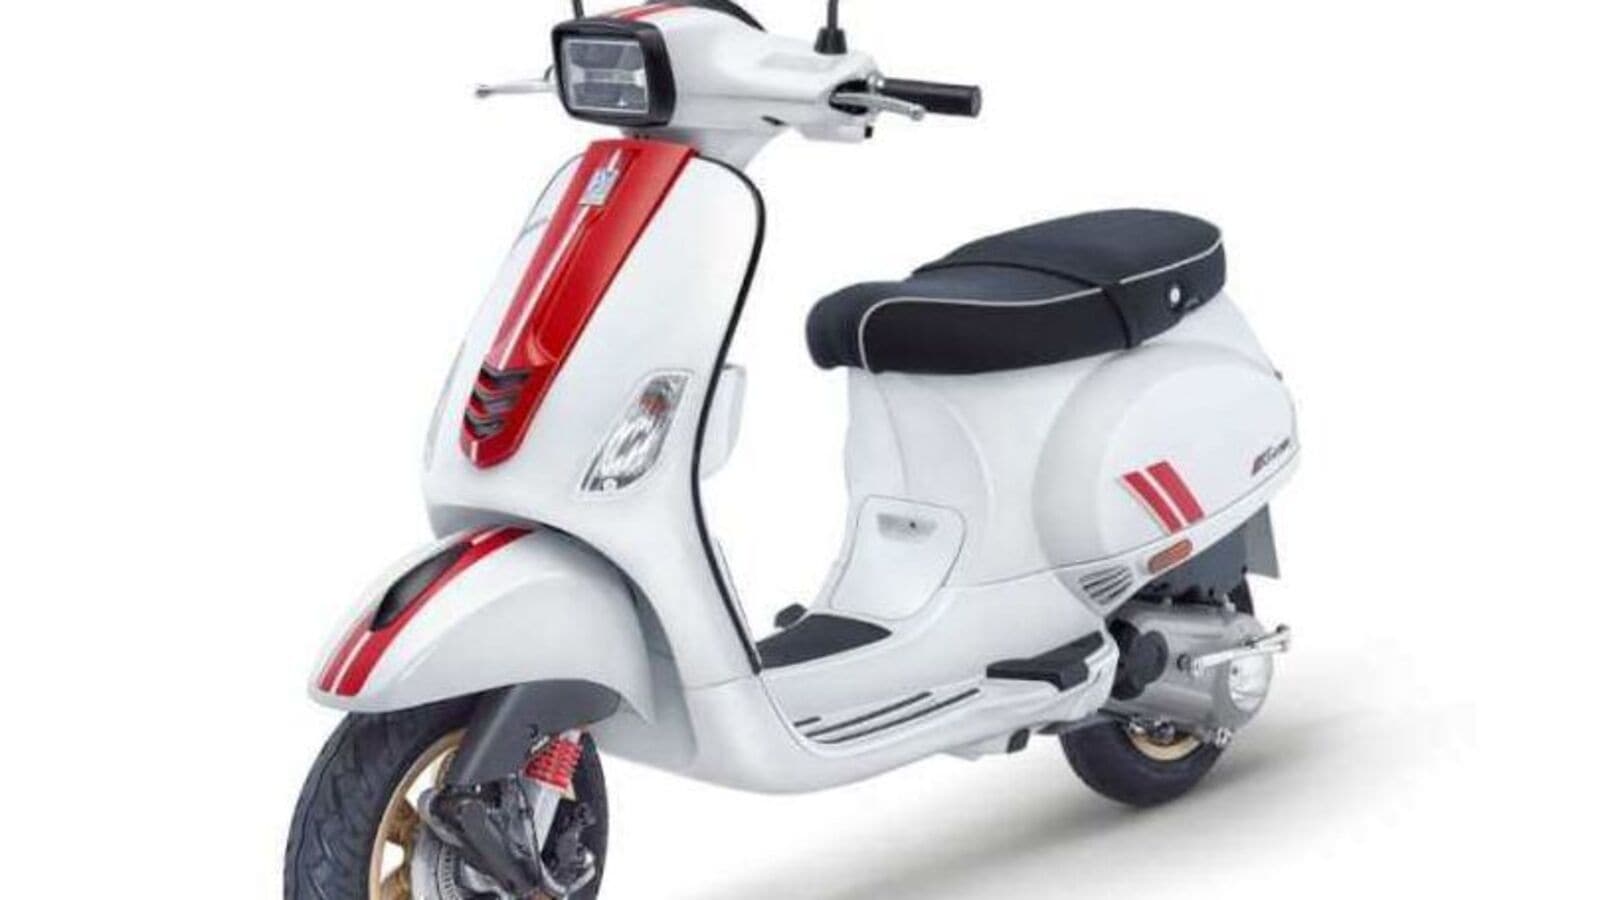 scooters get expensive India. Check new price list here |